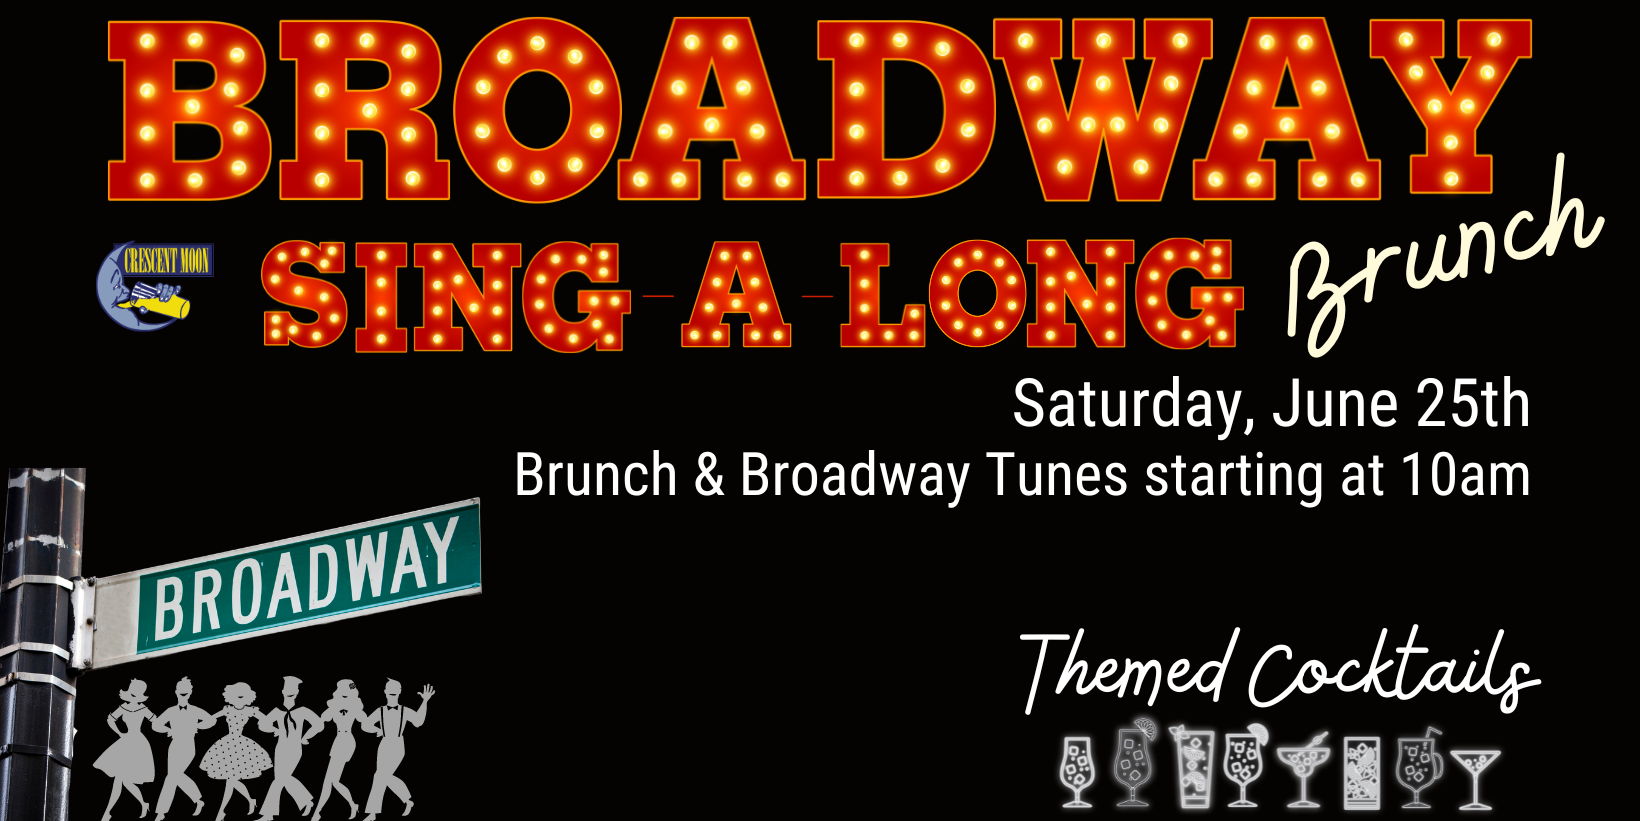 Broadway Sing-a-long Brunch promotional image